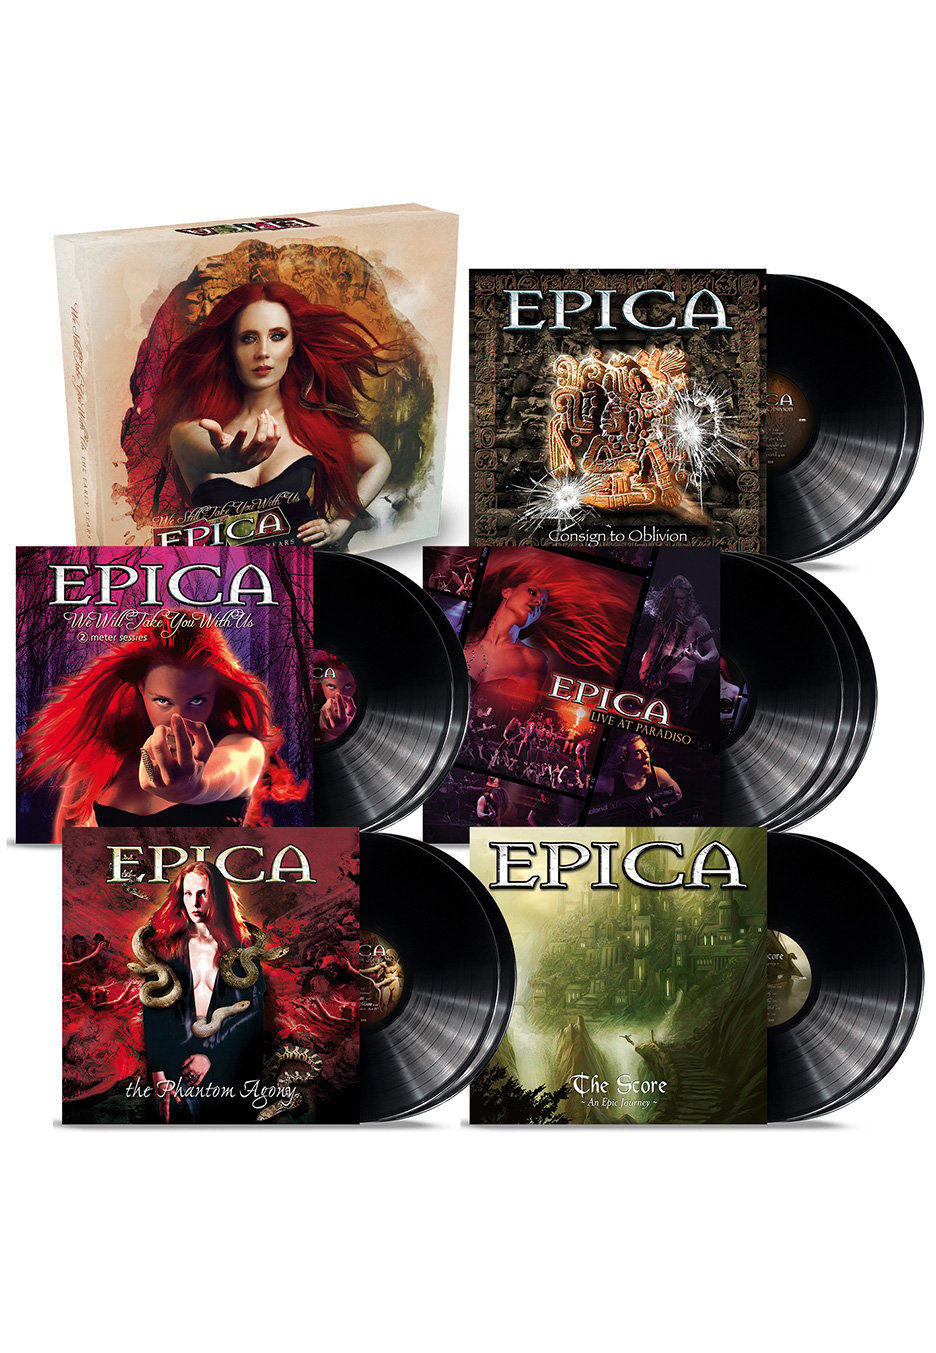 Epica - We Still Take You With Us: The Early Years Ltd. - 11 Vinyl Box